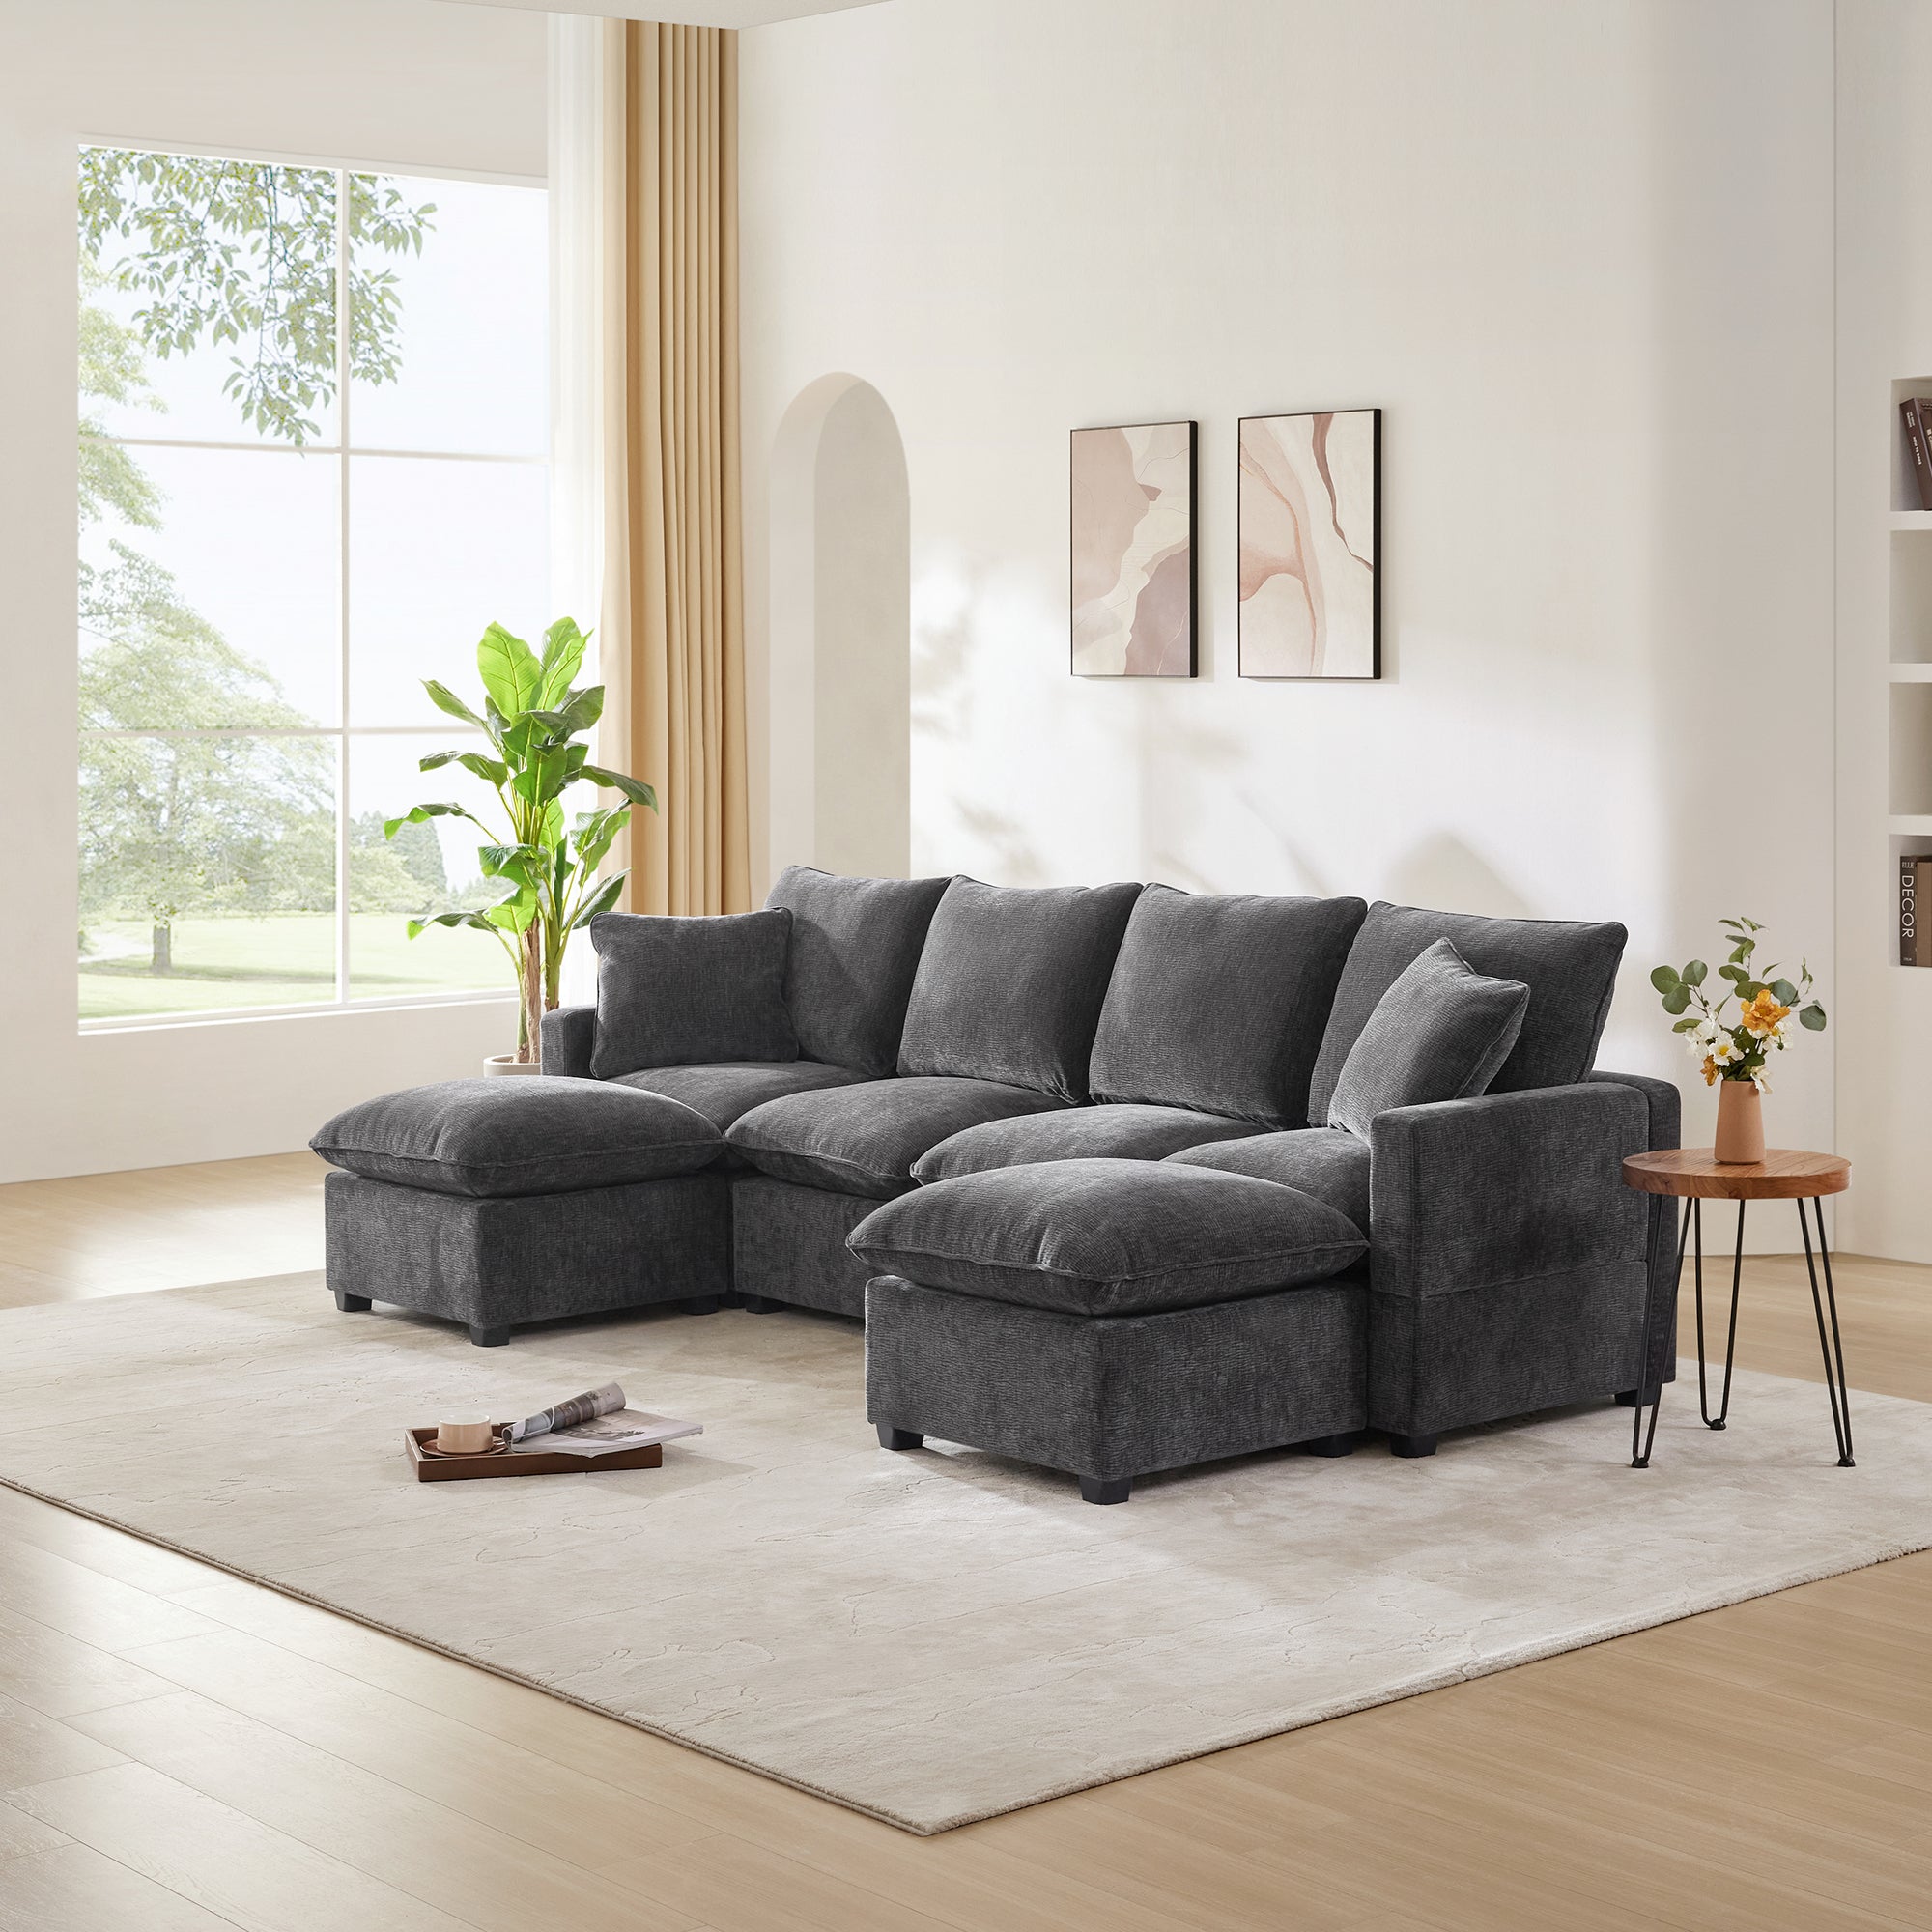 110*57" Modern U Shape Modular Sofa - 6 Seat Chenille Sectional Couch Set with 2 Pillows Included - Freely Combinable Indoor Furniture for Living Room, Apartment, Office - Available in 2 Colors